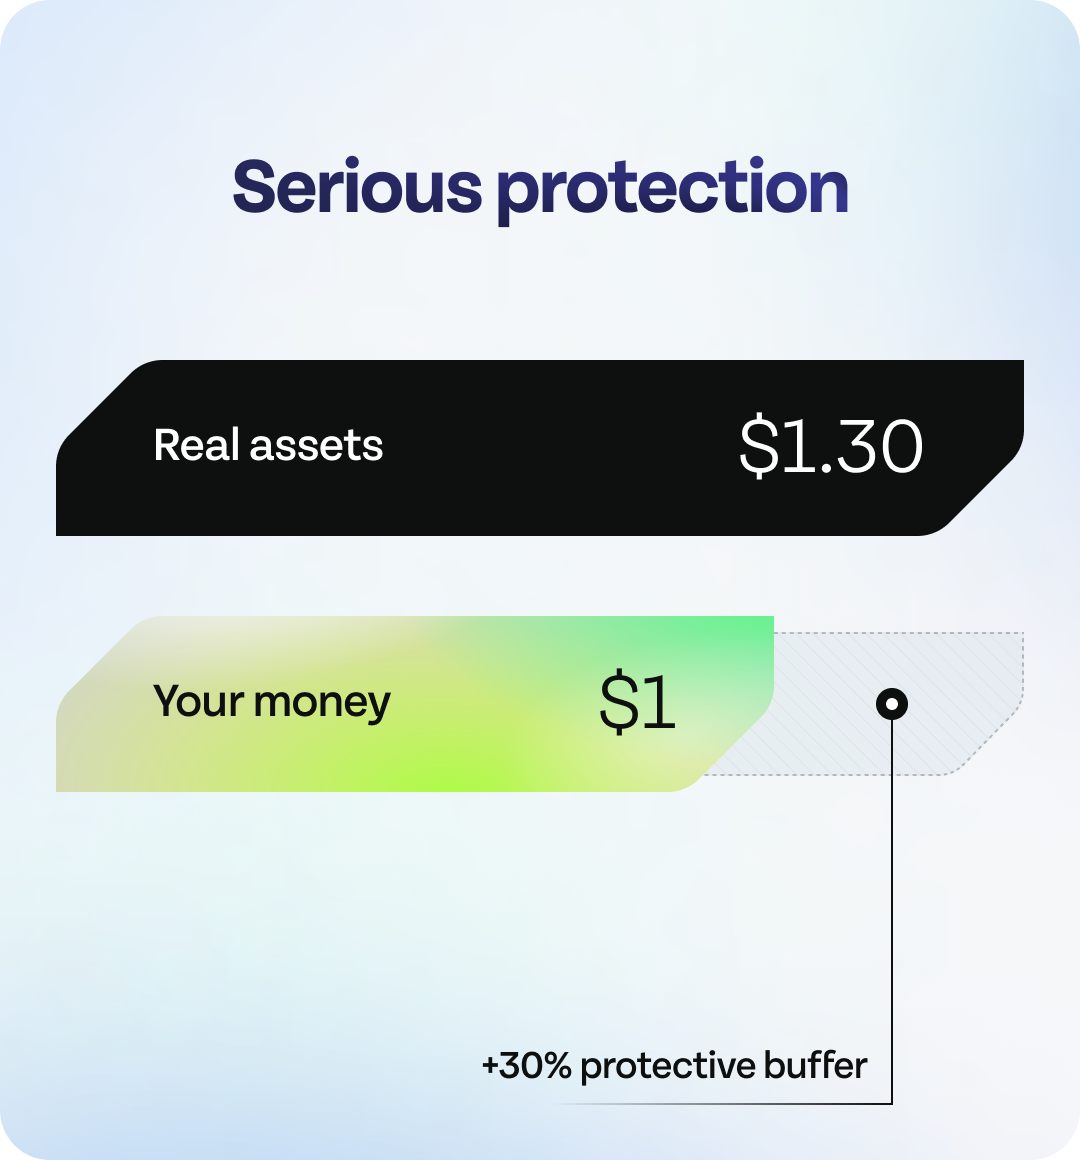 Image about Tellus serious protection where it says that for every $1 of your money Tellus has at least $ 1.35 in real assets